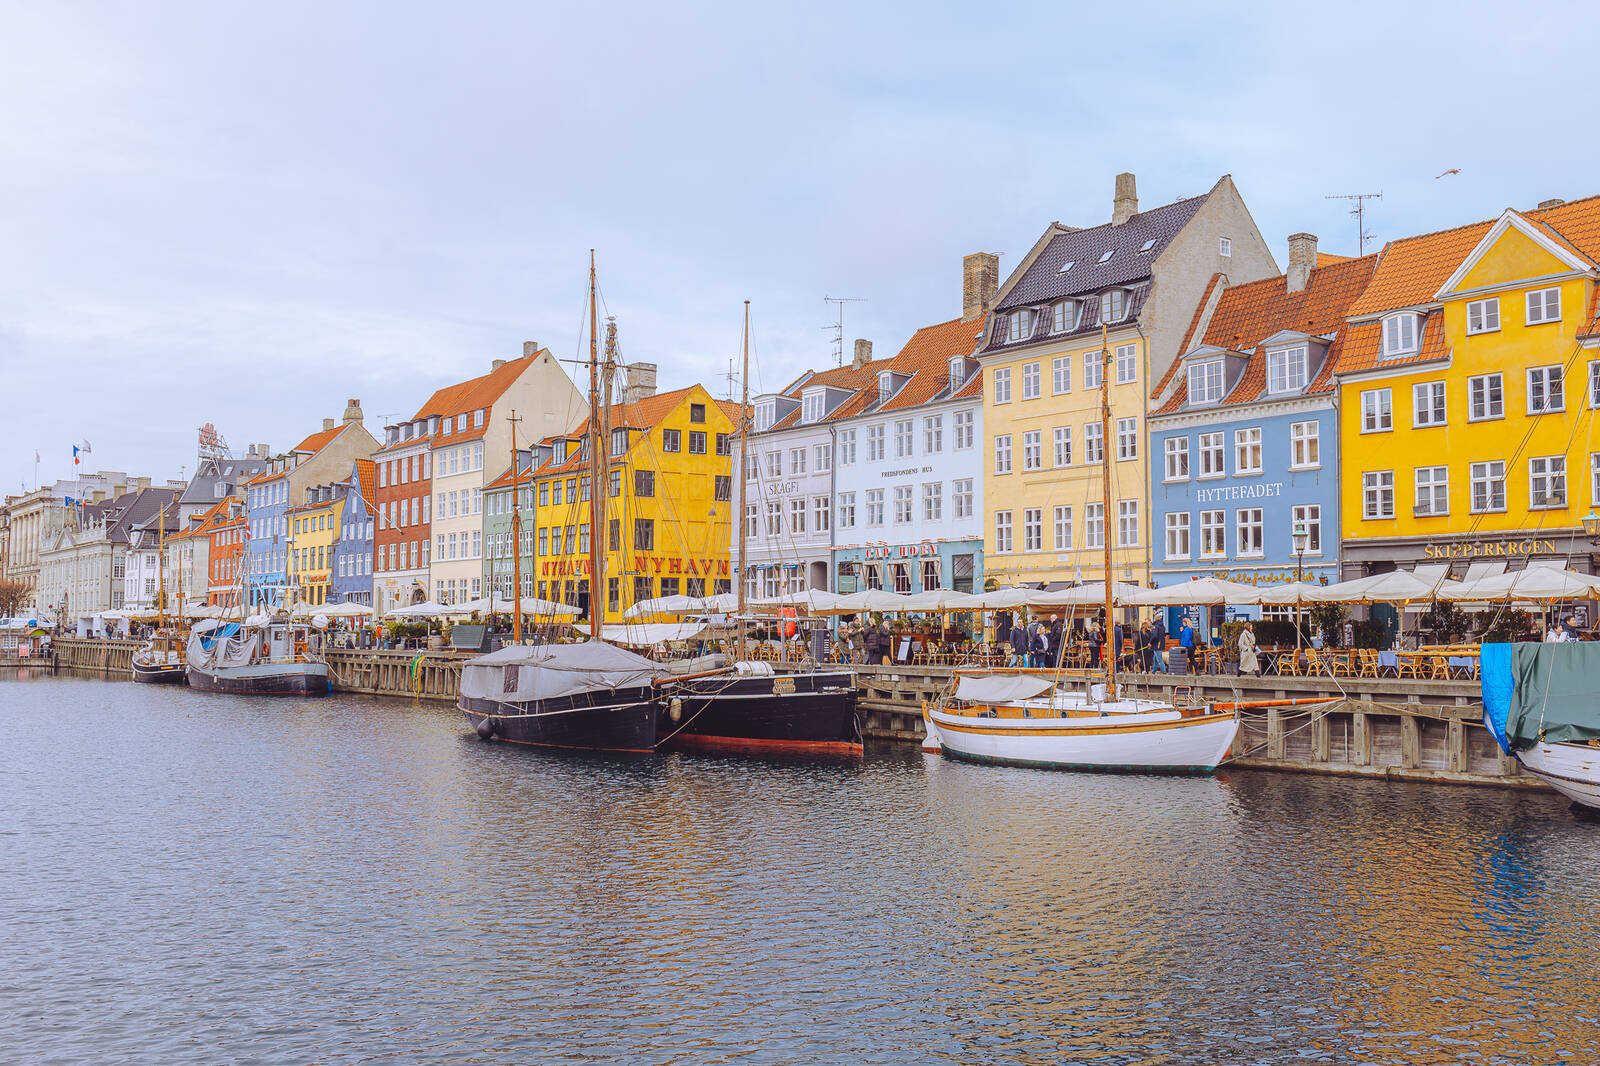 Image of Nyhavn Canal by Richard Davies